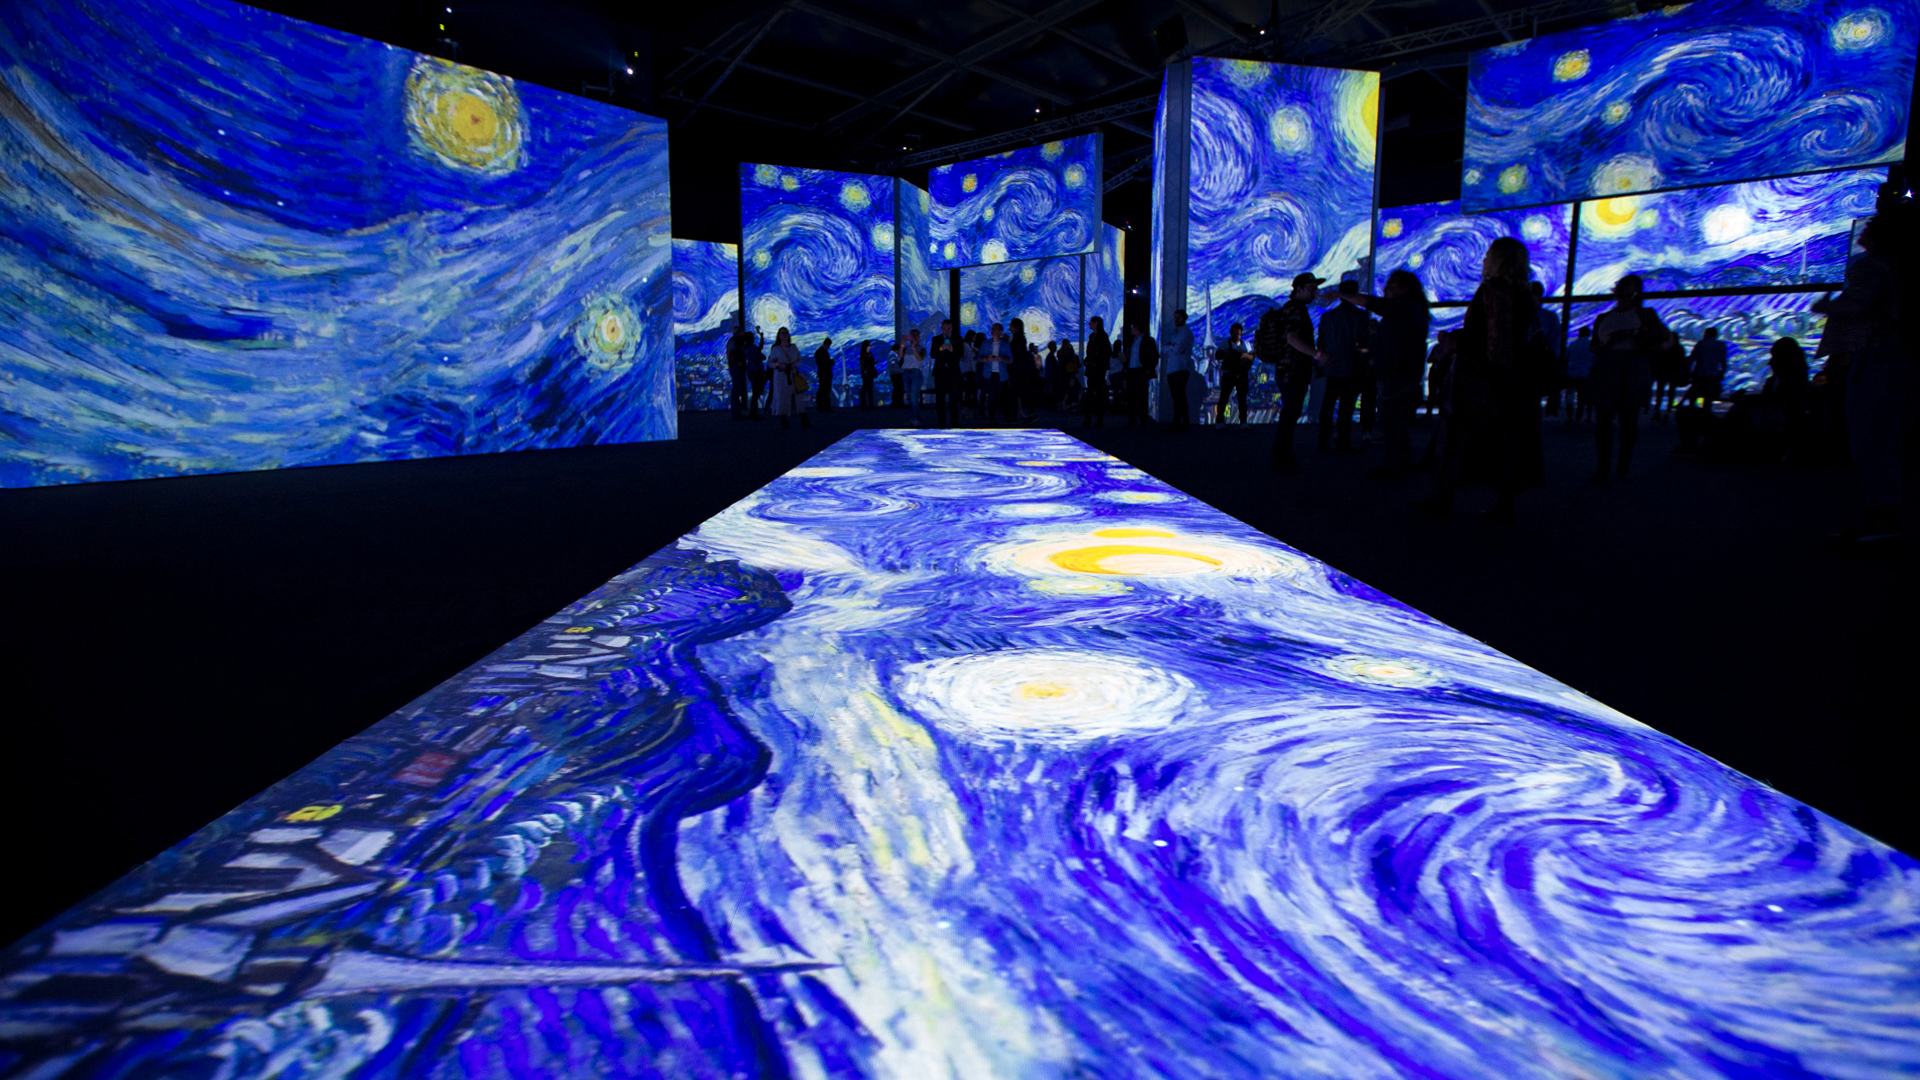 A peek into the brilliant mind of an artist at 'Van Gogh Alive'